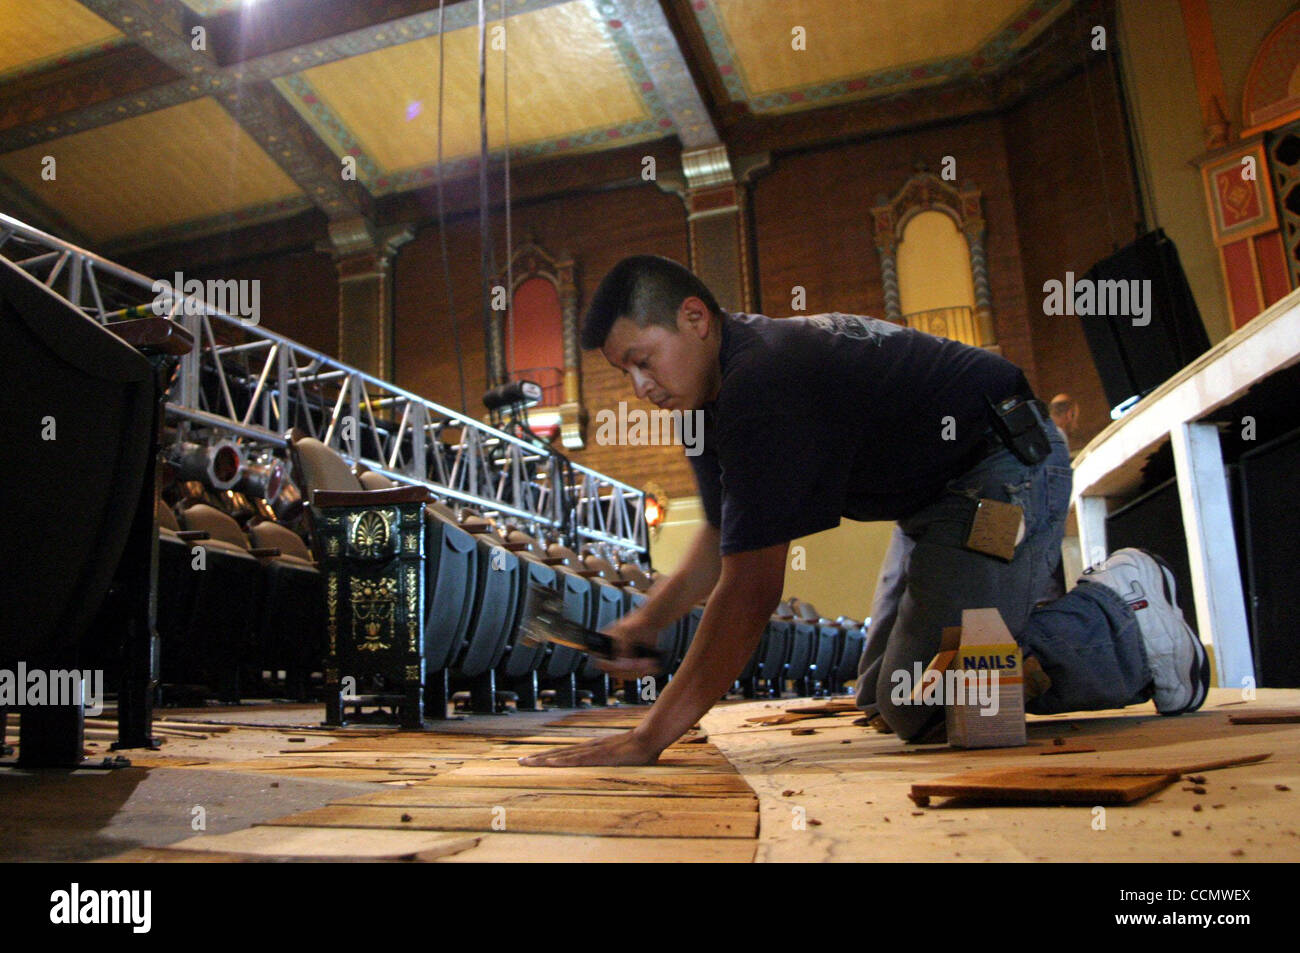 Jorge Duran (cq) works on the flooring at the El Campanil theatre in Antioch, Calif. on Thursday, June 24, 2004. The 1920's art-deco theatre is receiving a multi-million dollar facelift.  (Dean Coppola/Contra Costa Times) Stock Photo